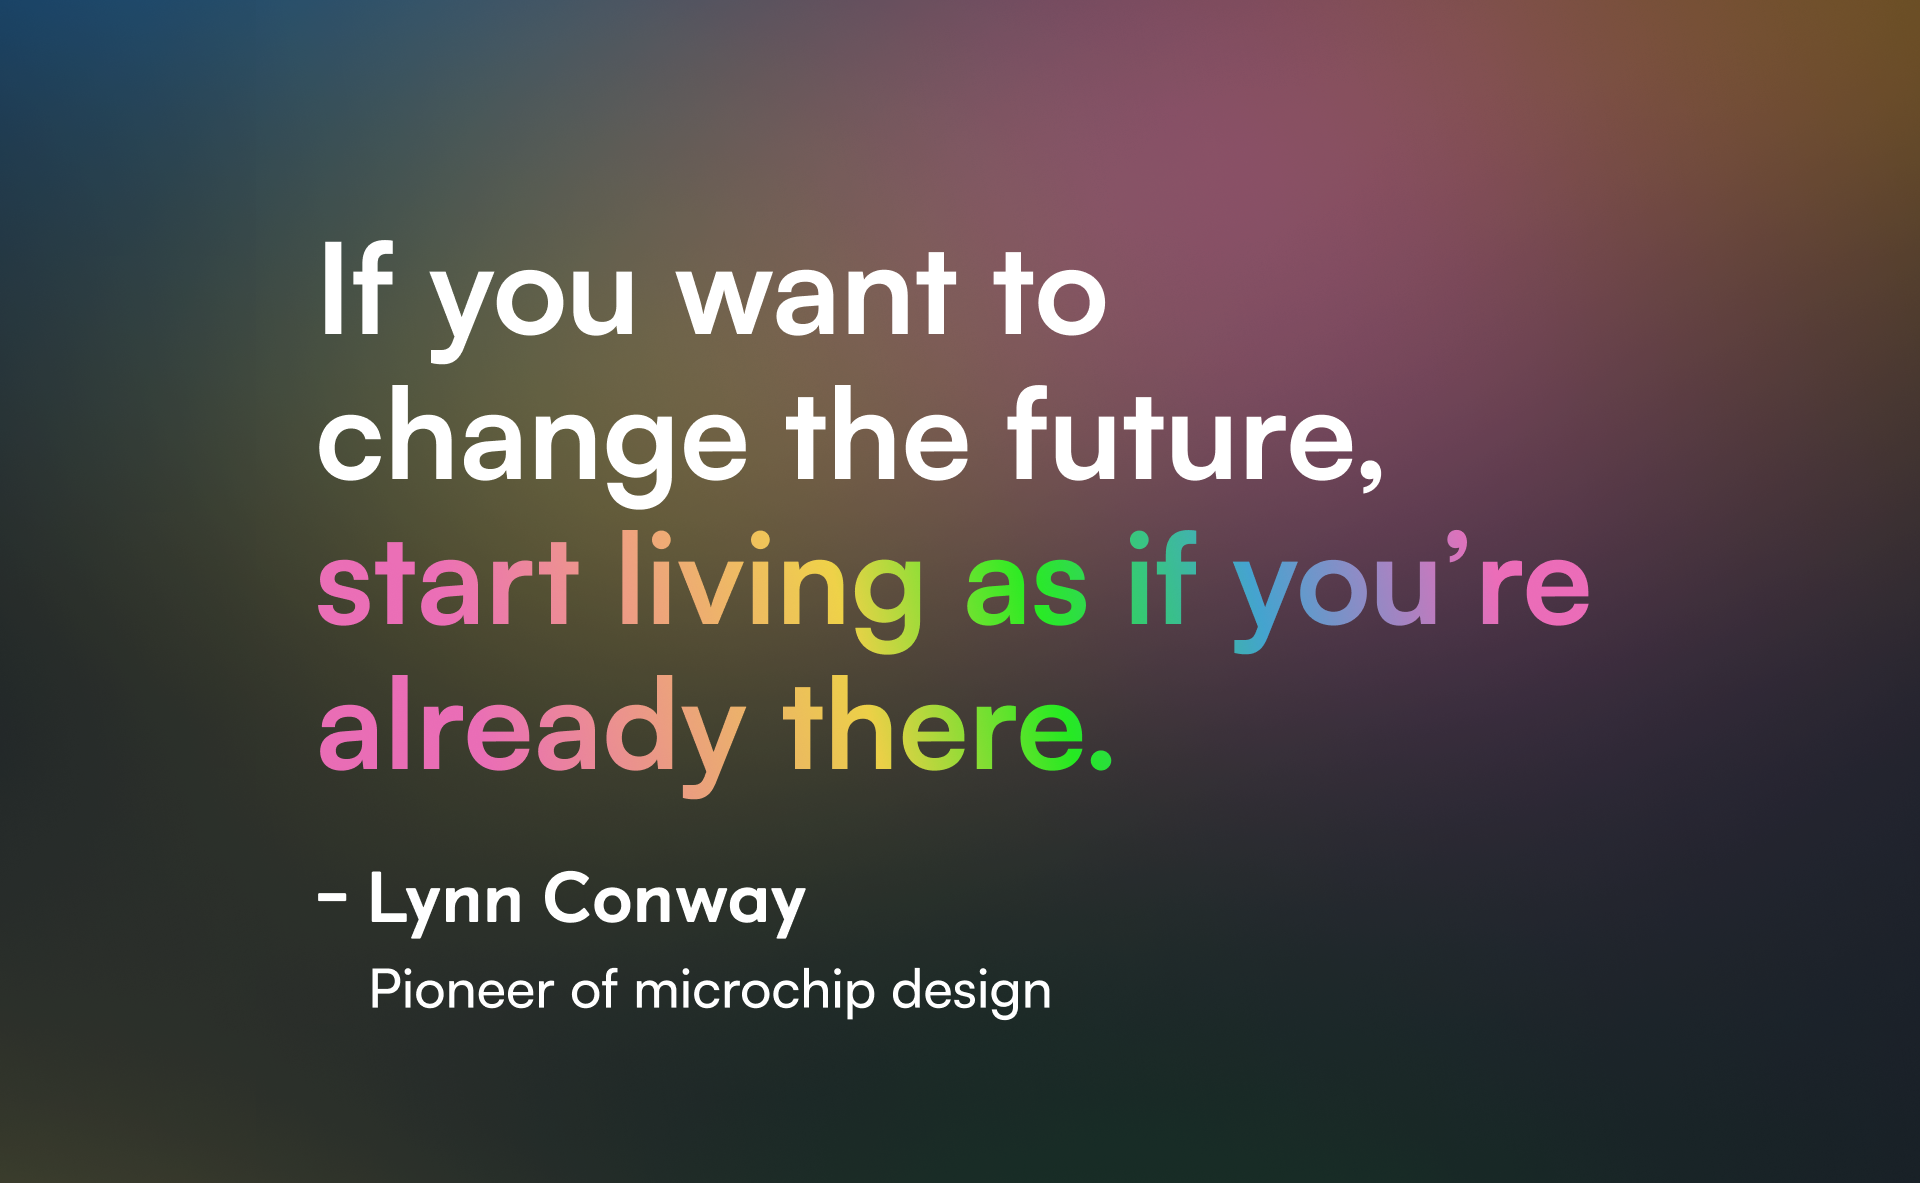 Lynn Conway quote